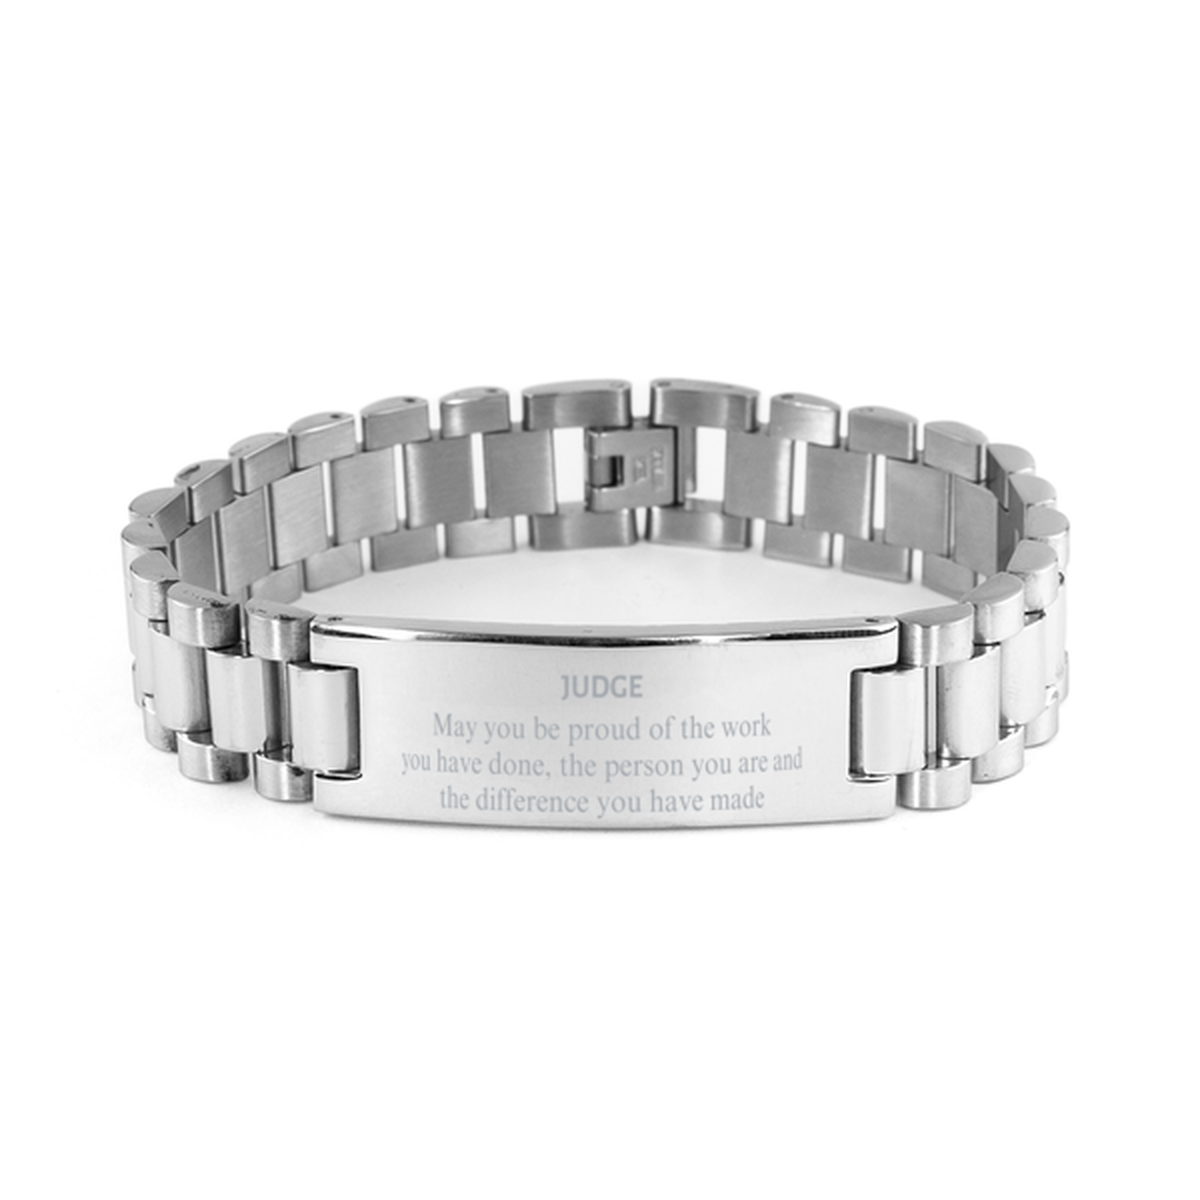 Judge May you be proud of the work you have done, Retirement Judge Ladder Stainless Steel Bracelet for Colleague Appreciation Gifts Amazing for Judge